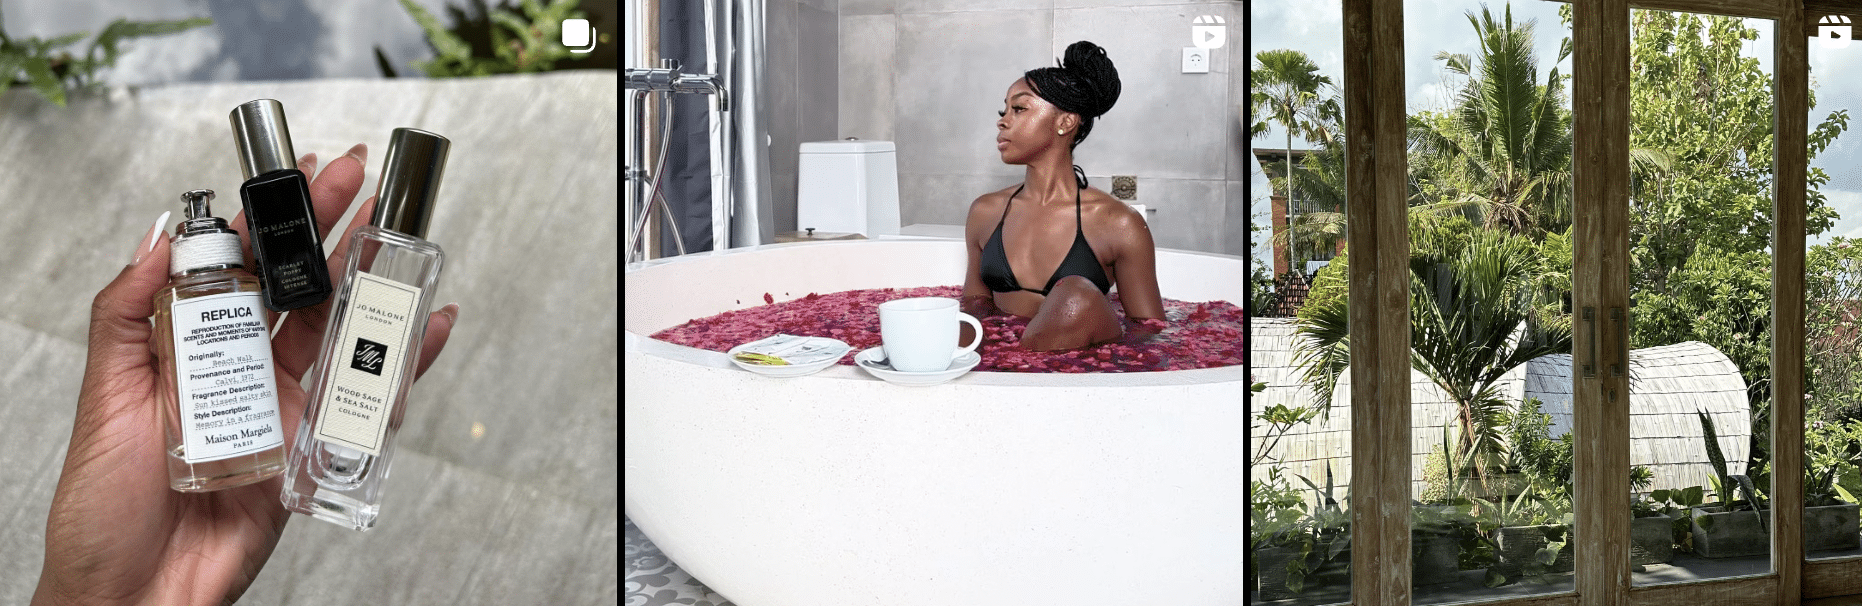 A woman is sitting in a bathtub with a bottle of perfume.